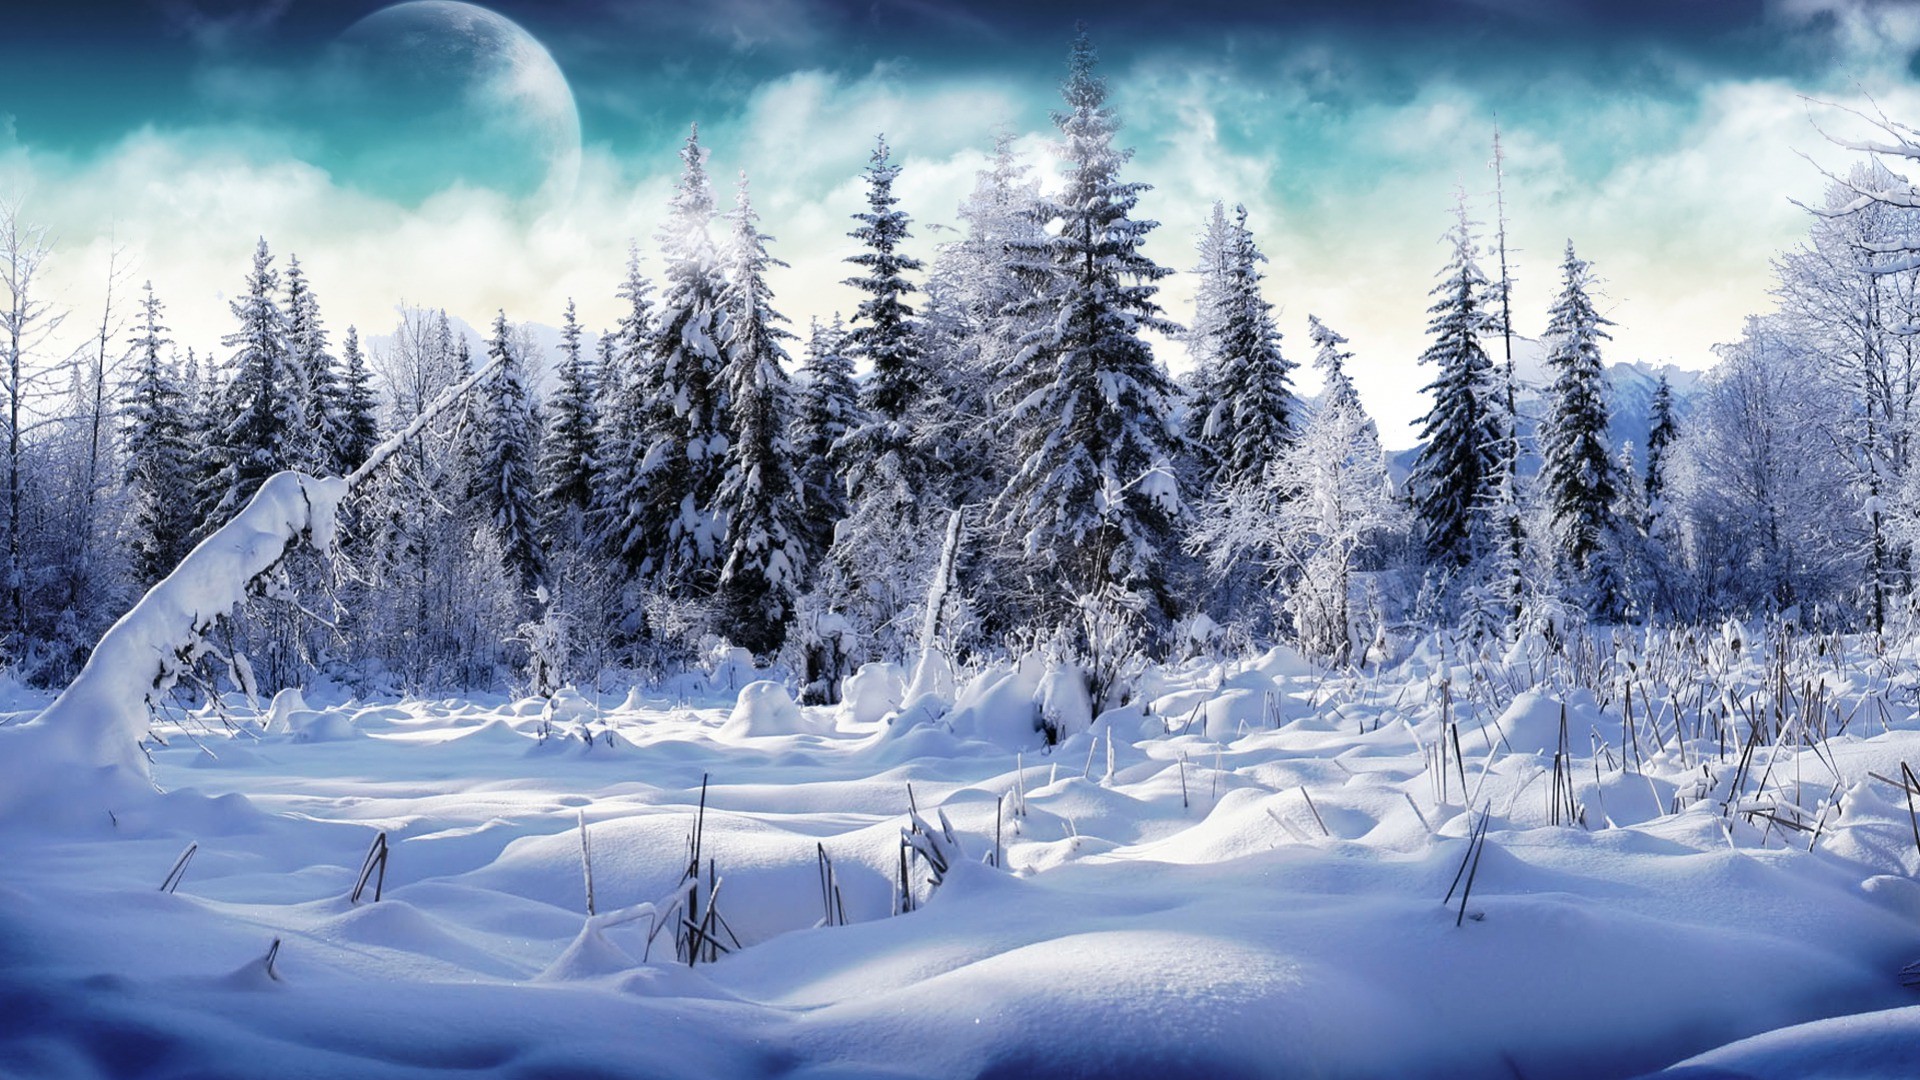 1920x1080 Wallpaper Wednesday: Here's some winter themed wallpapers for you imgur!